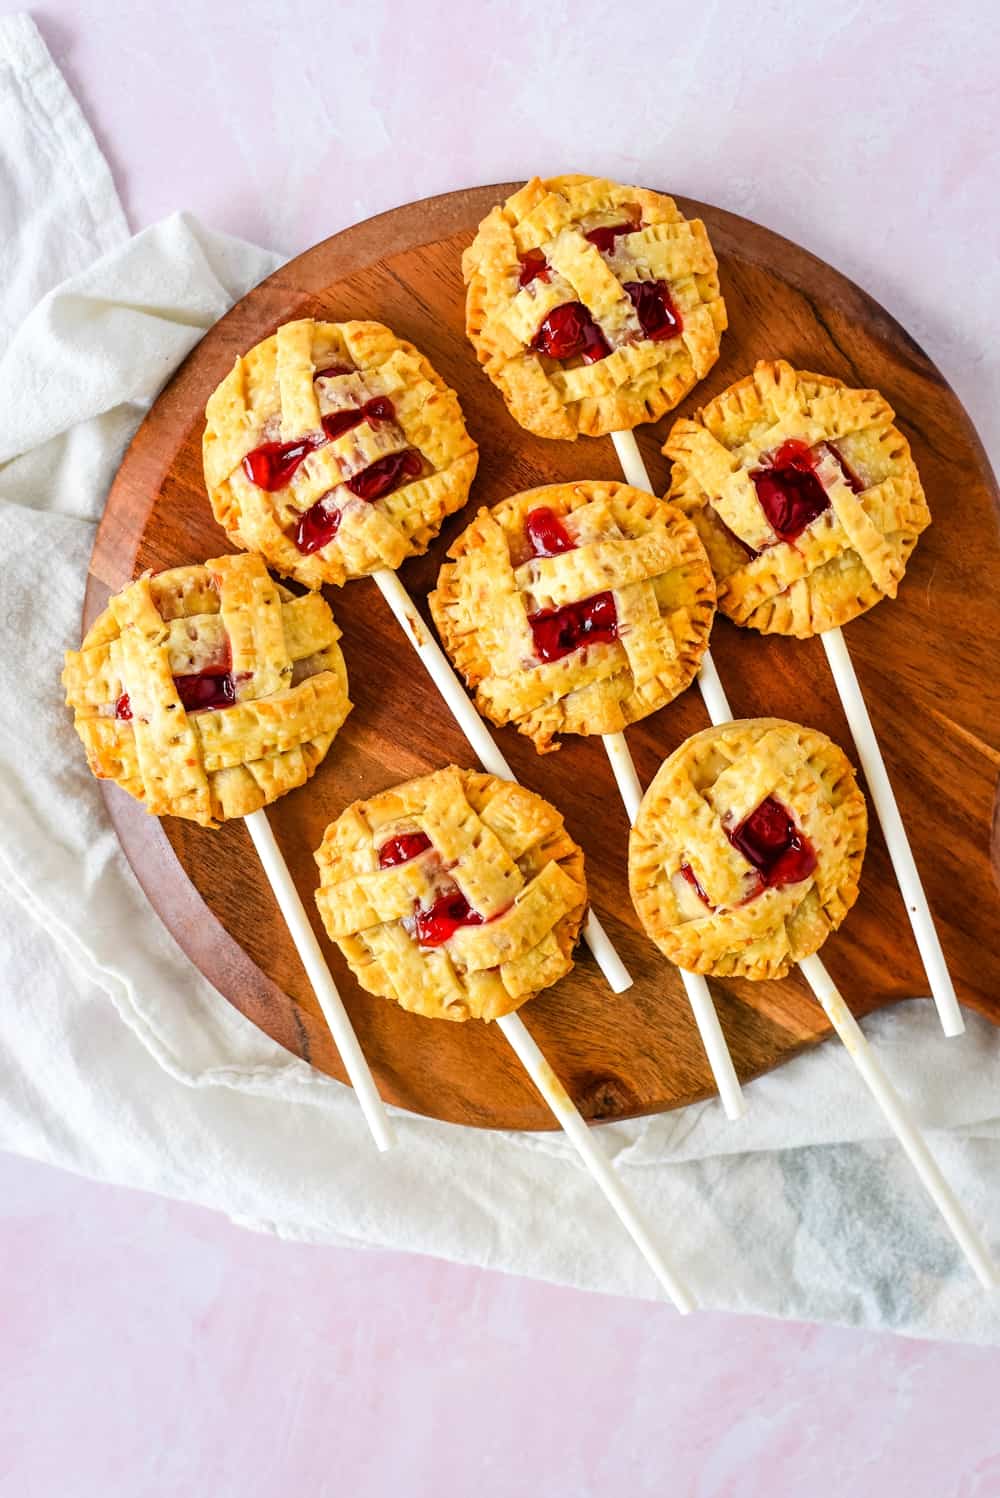 Easy and Cute Cherry Pie Pops Recipe – Just 3 Ingredients!